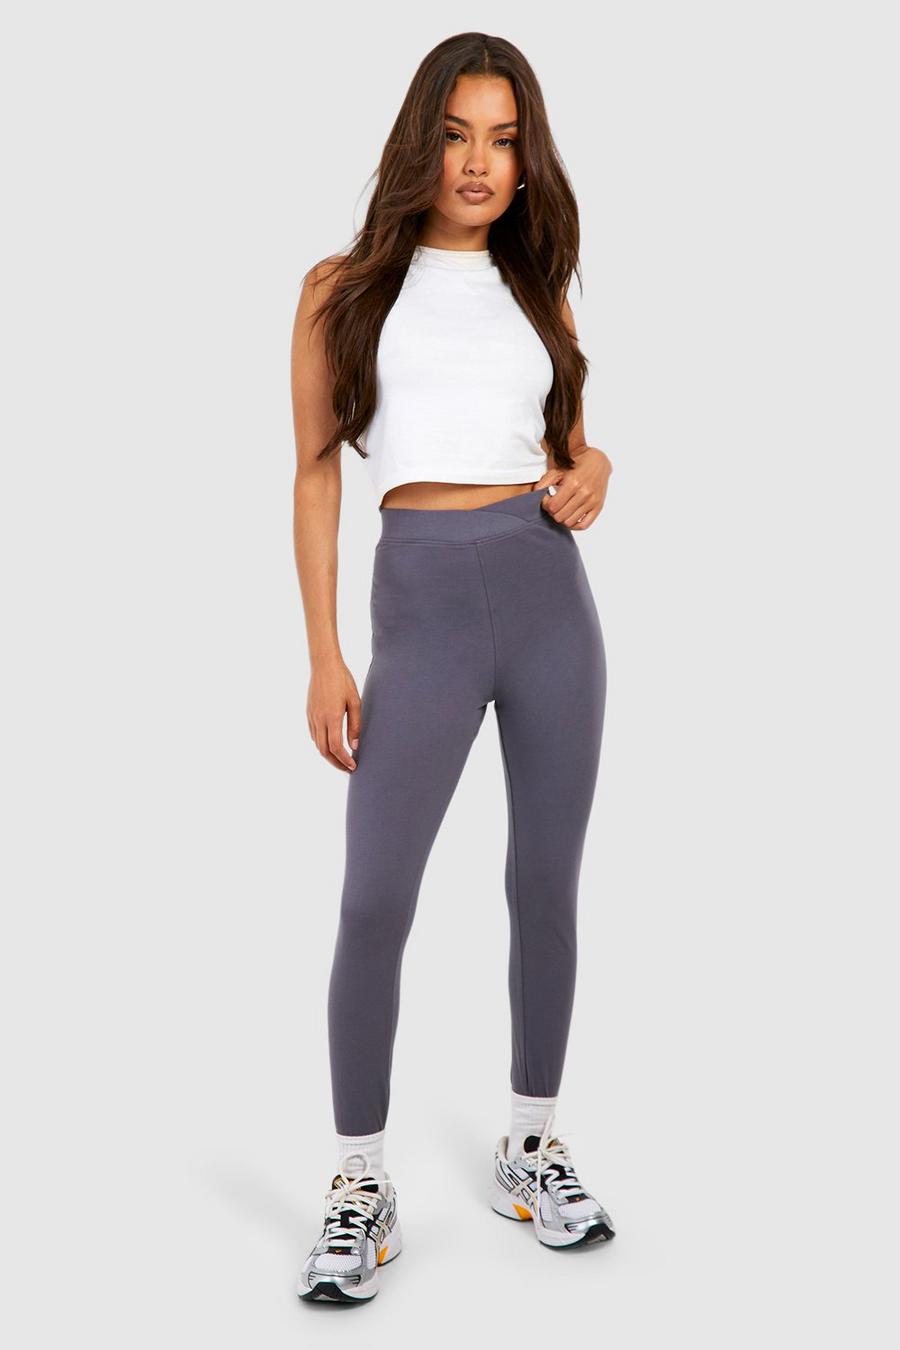 Pringle Heatholders Woman Jeggings Multipack Thermal Tops for Women UK  Womens High Waisted Leggings Sticky Roll Cotton Silver : :  Fashion